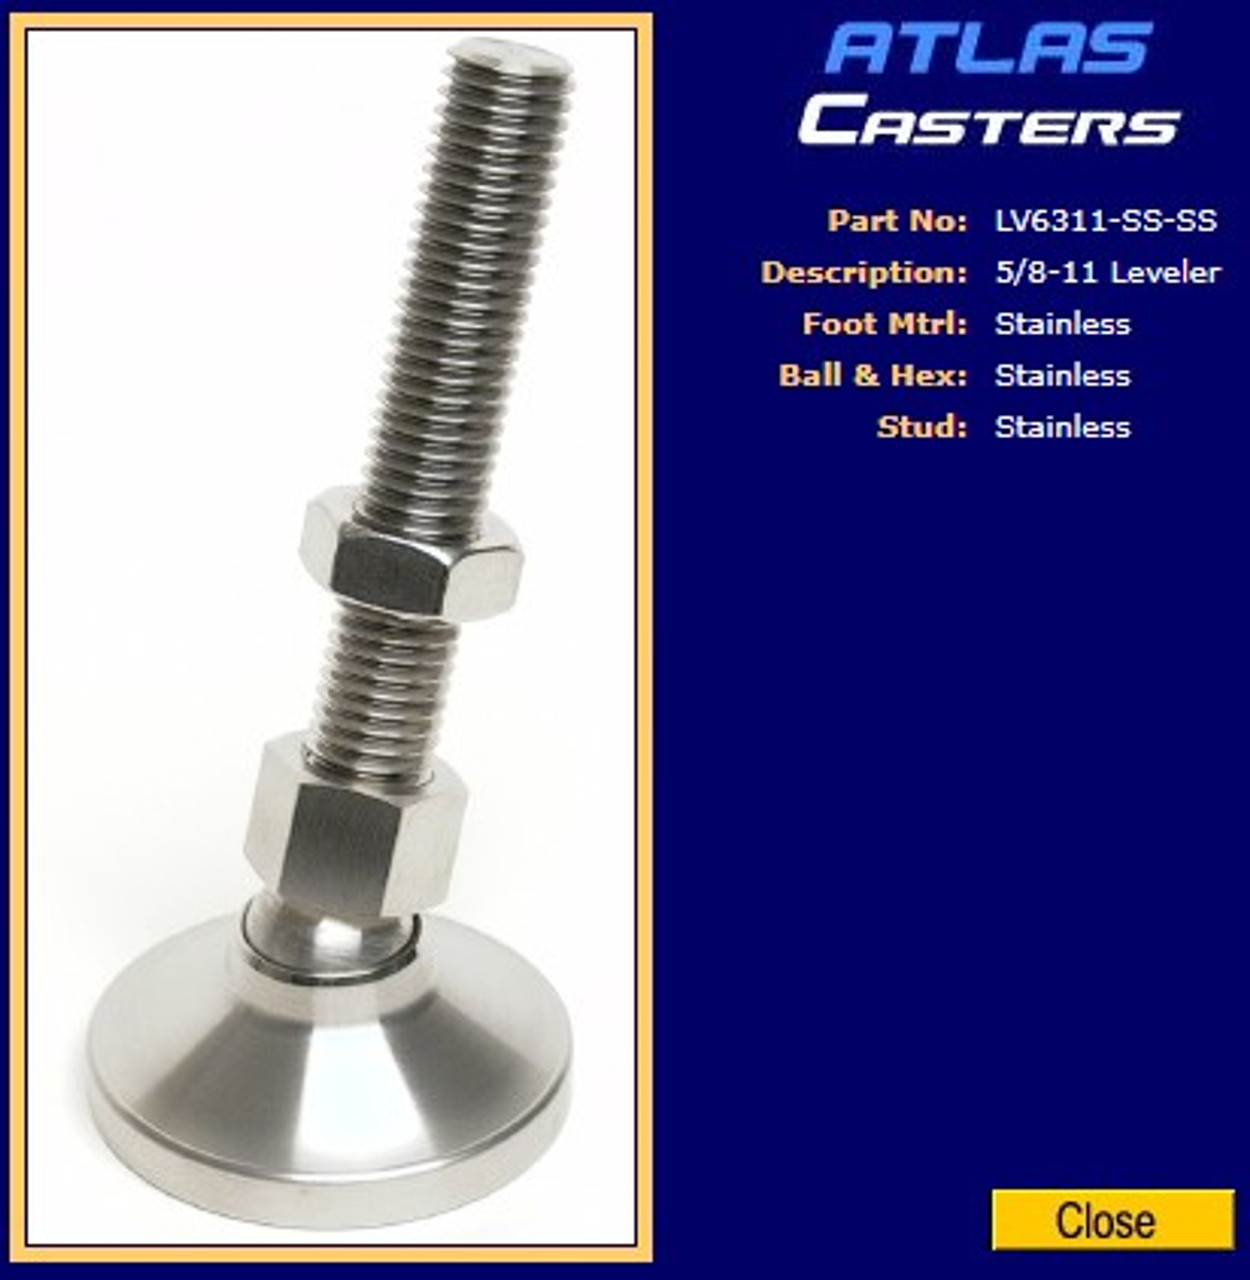 LV6311-SS-SS Stainless Steel Leveler with 5/8-11 x 3.5" stem